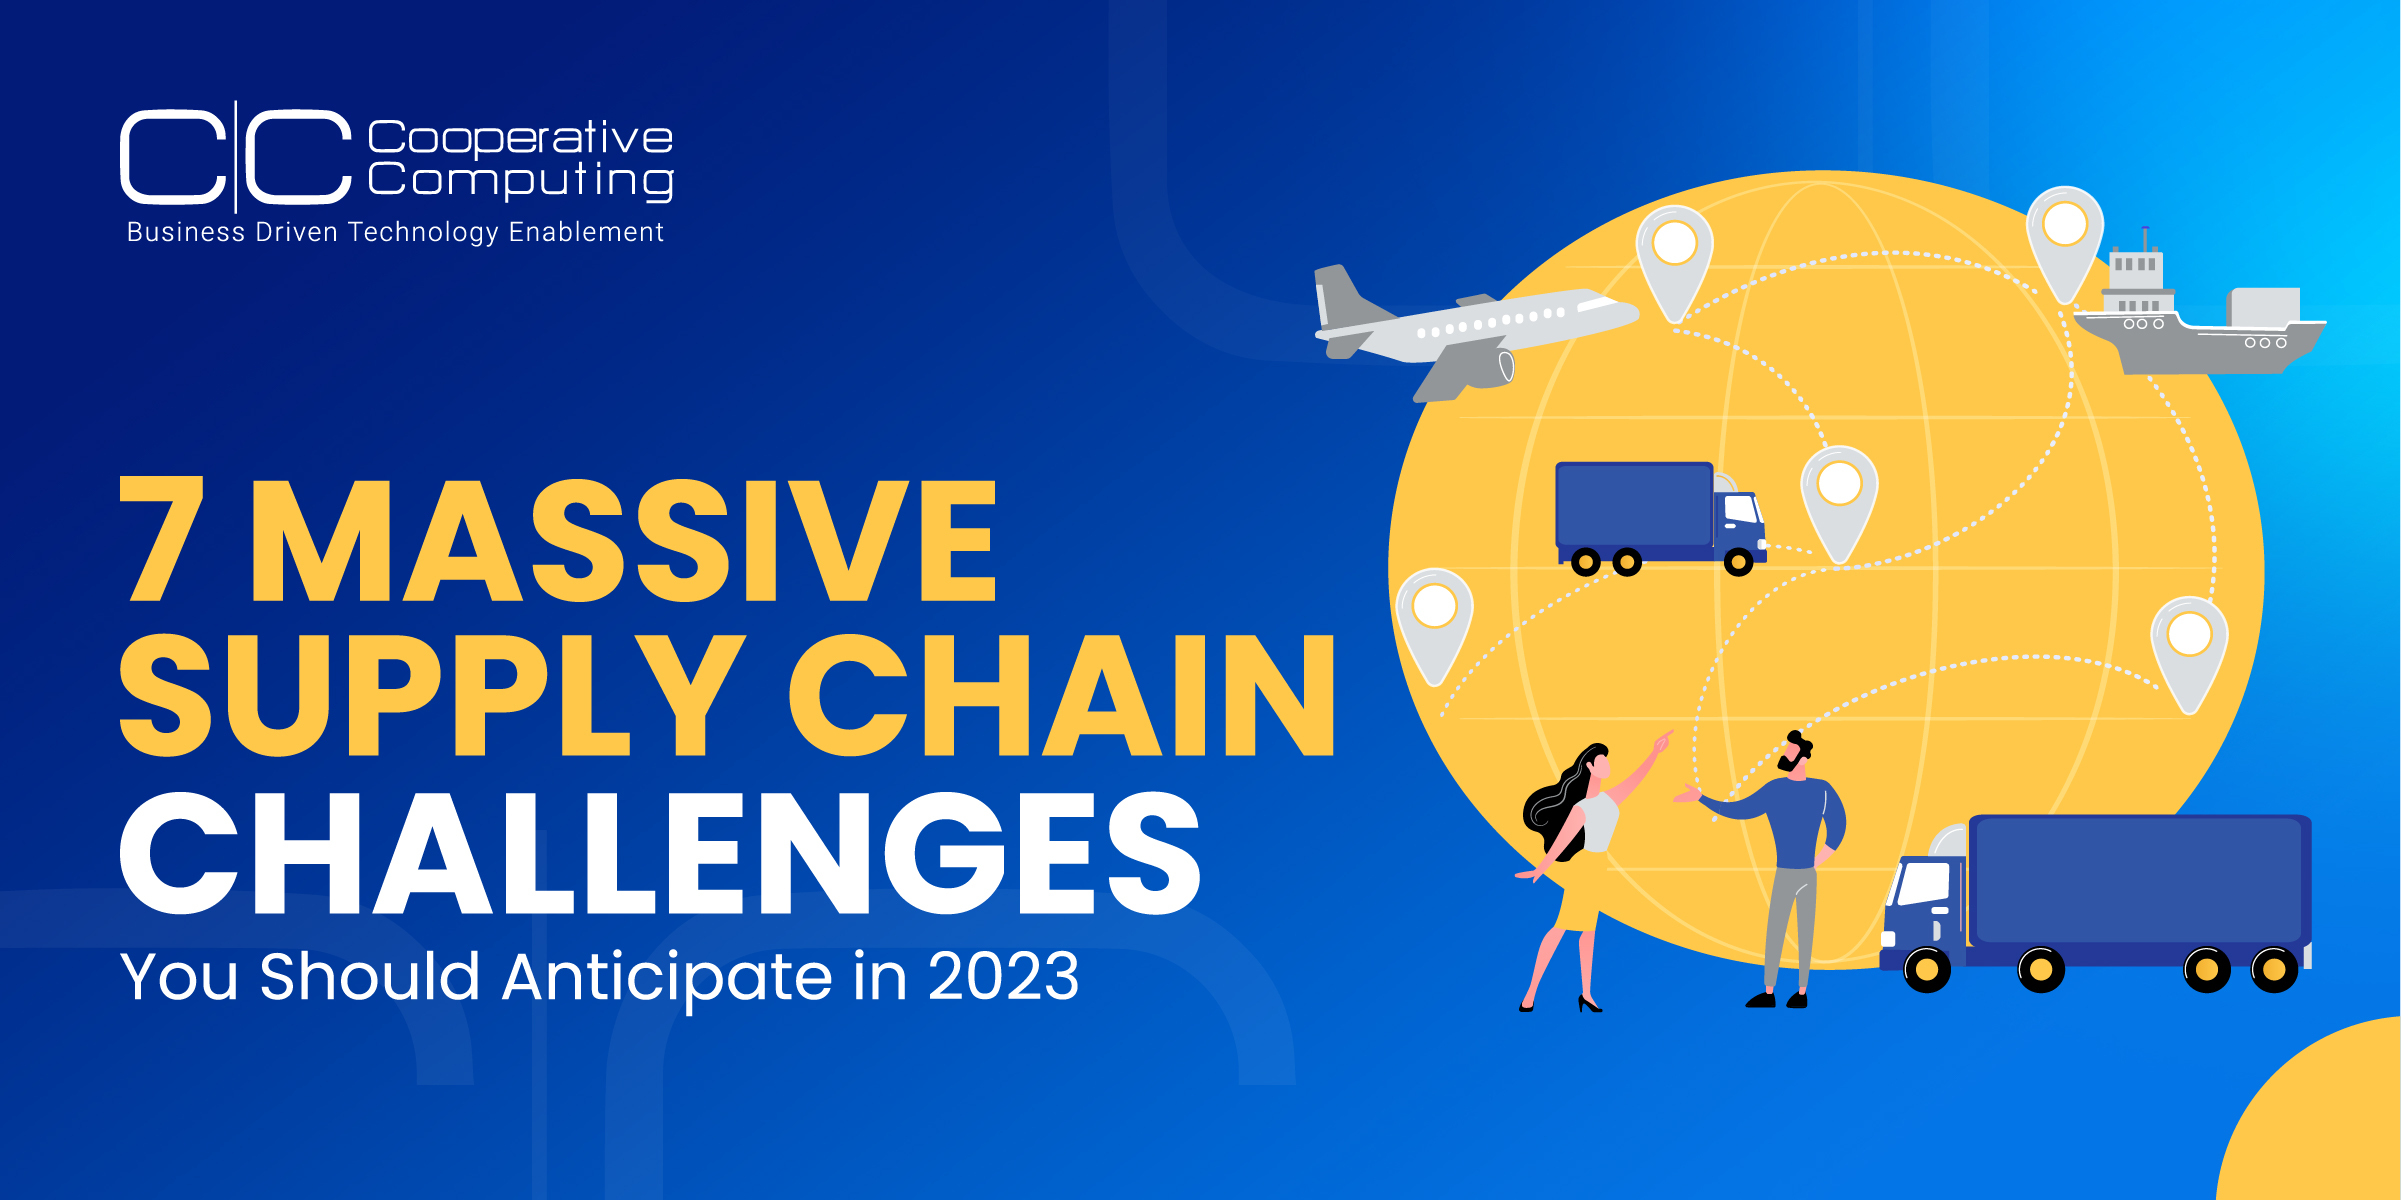 7 Massive Supply Chain Challenges You Should Anticipate in 2023 | Cooperative Computing | Blog